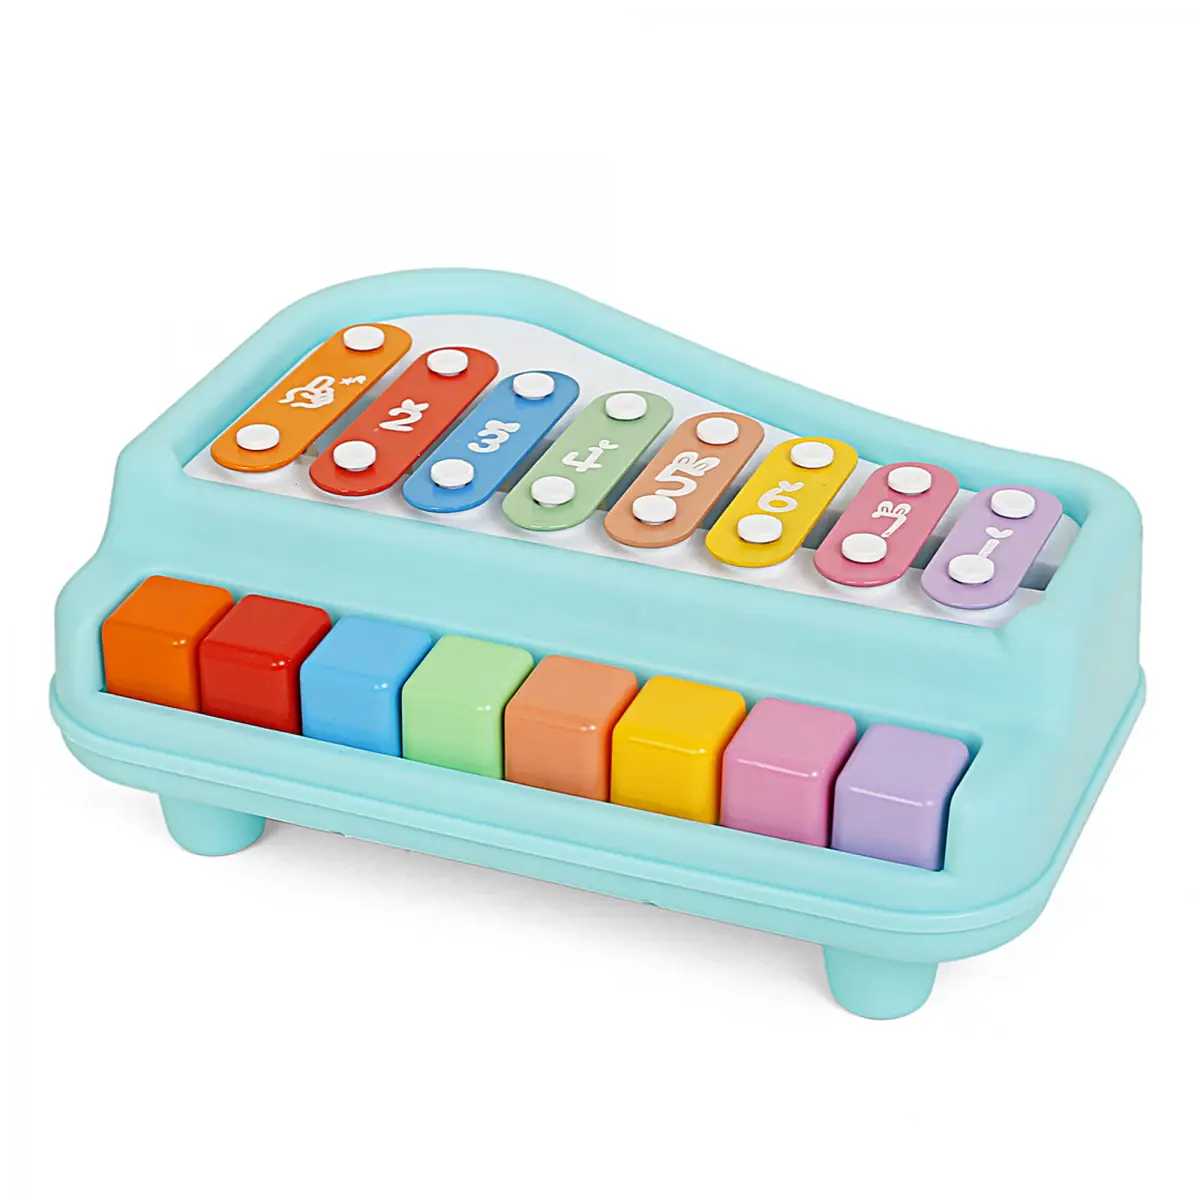 Shooting Star 2 in 1 Melodious Xylophone Piano, 18M+, Multicolour